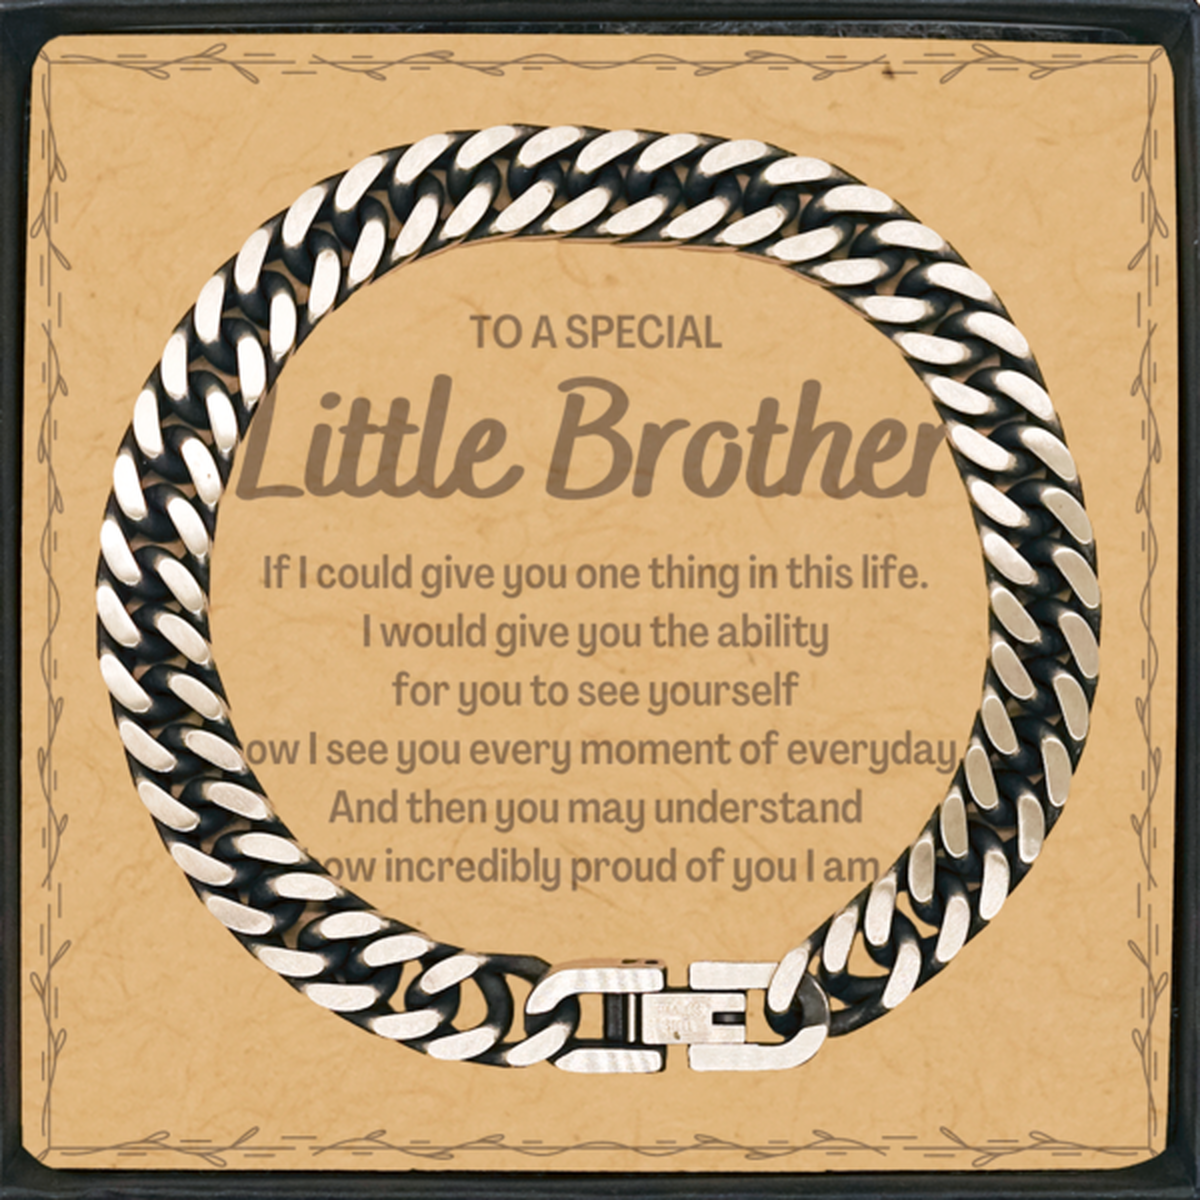 To My Little Brother Cuban Link Chain Bracelet, Gifts For Little Brother Message Card, Inspirational Gifts for Christmas Birthday, Epic Gifts for Little Brother To A Special Little Brother how incredibly proud of you I am